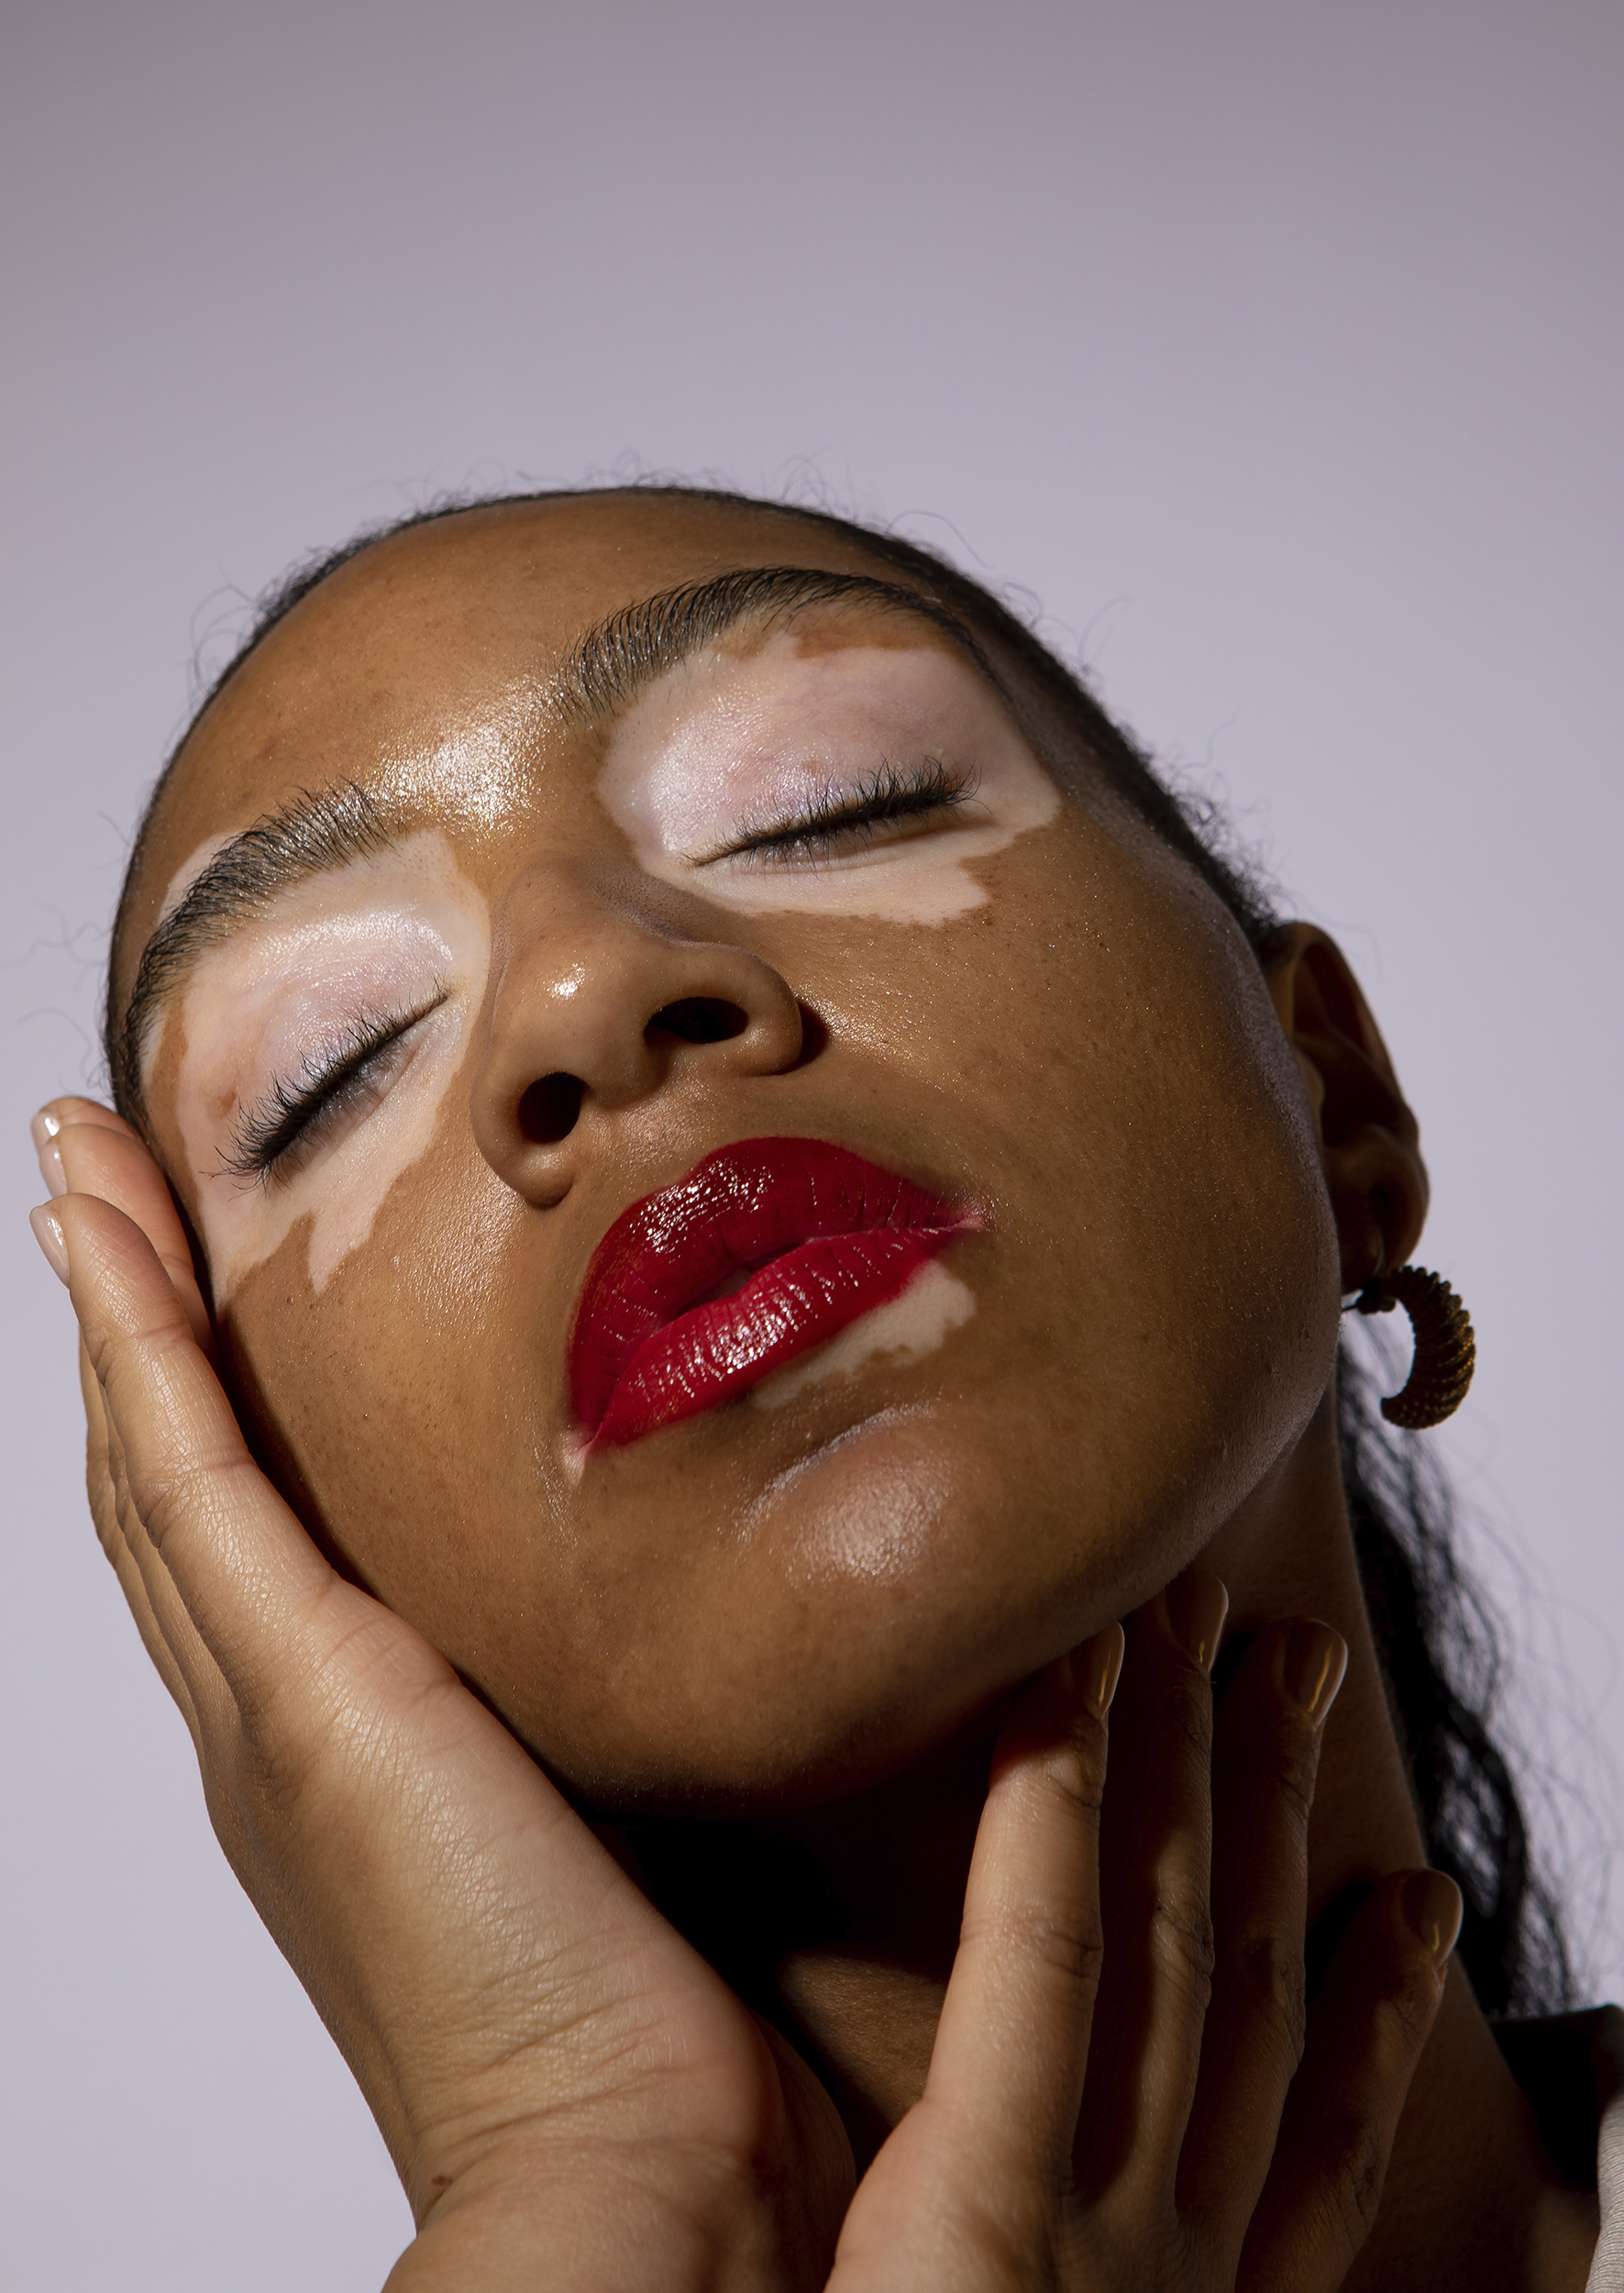 BA Photography work by Beth Unsworth showing a portrait of a woman with Vitiligo holding her face, wearing red lipstick.